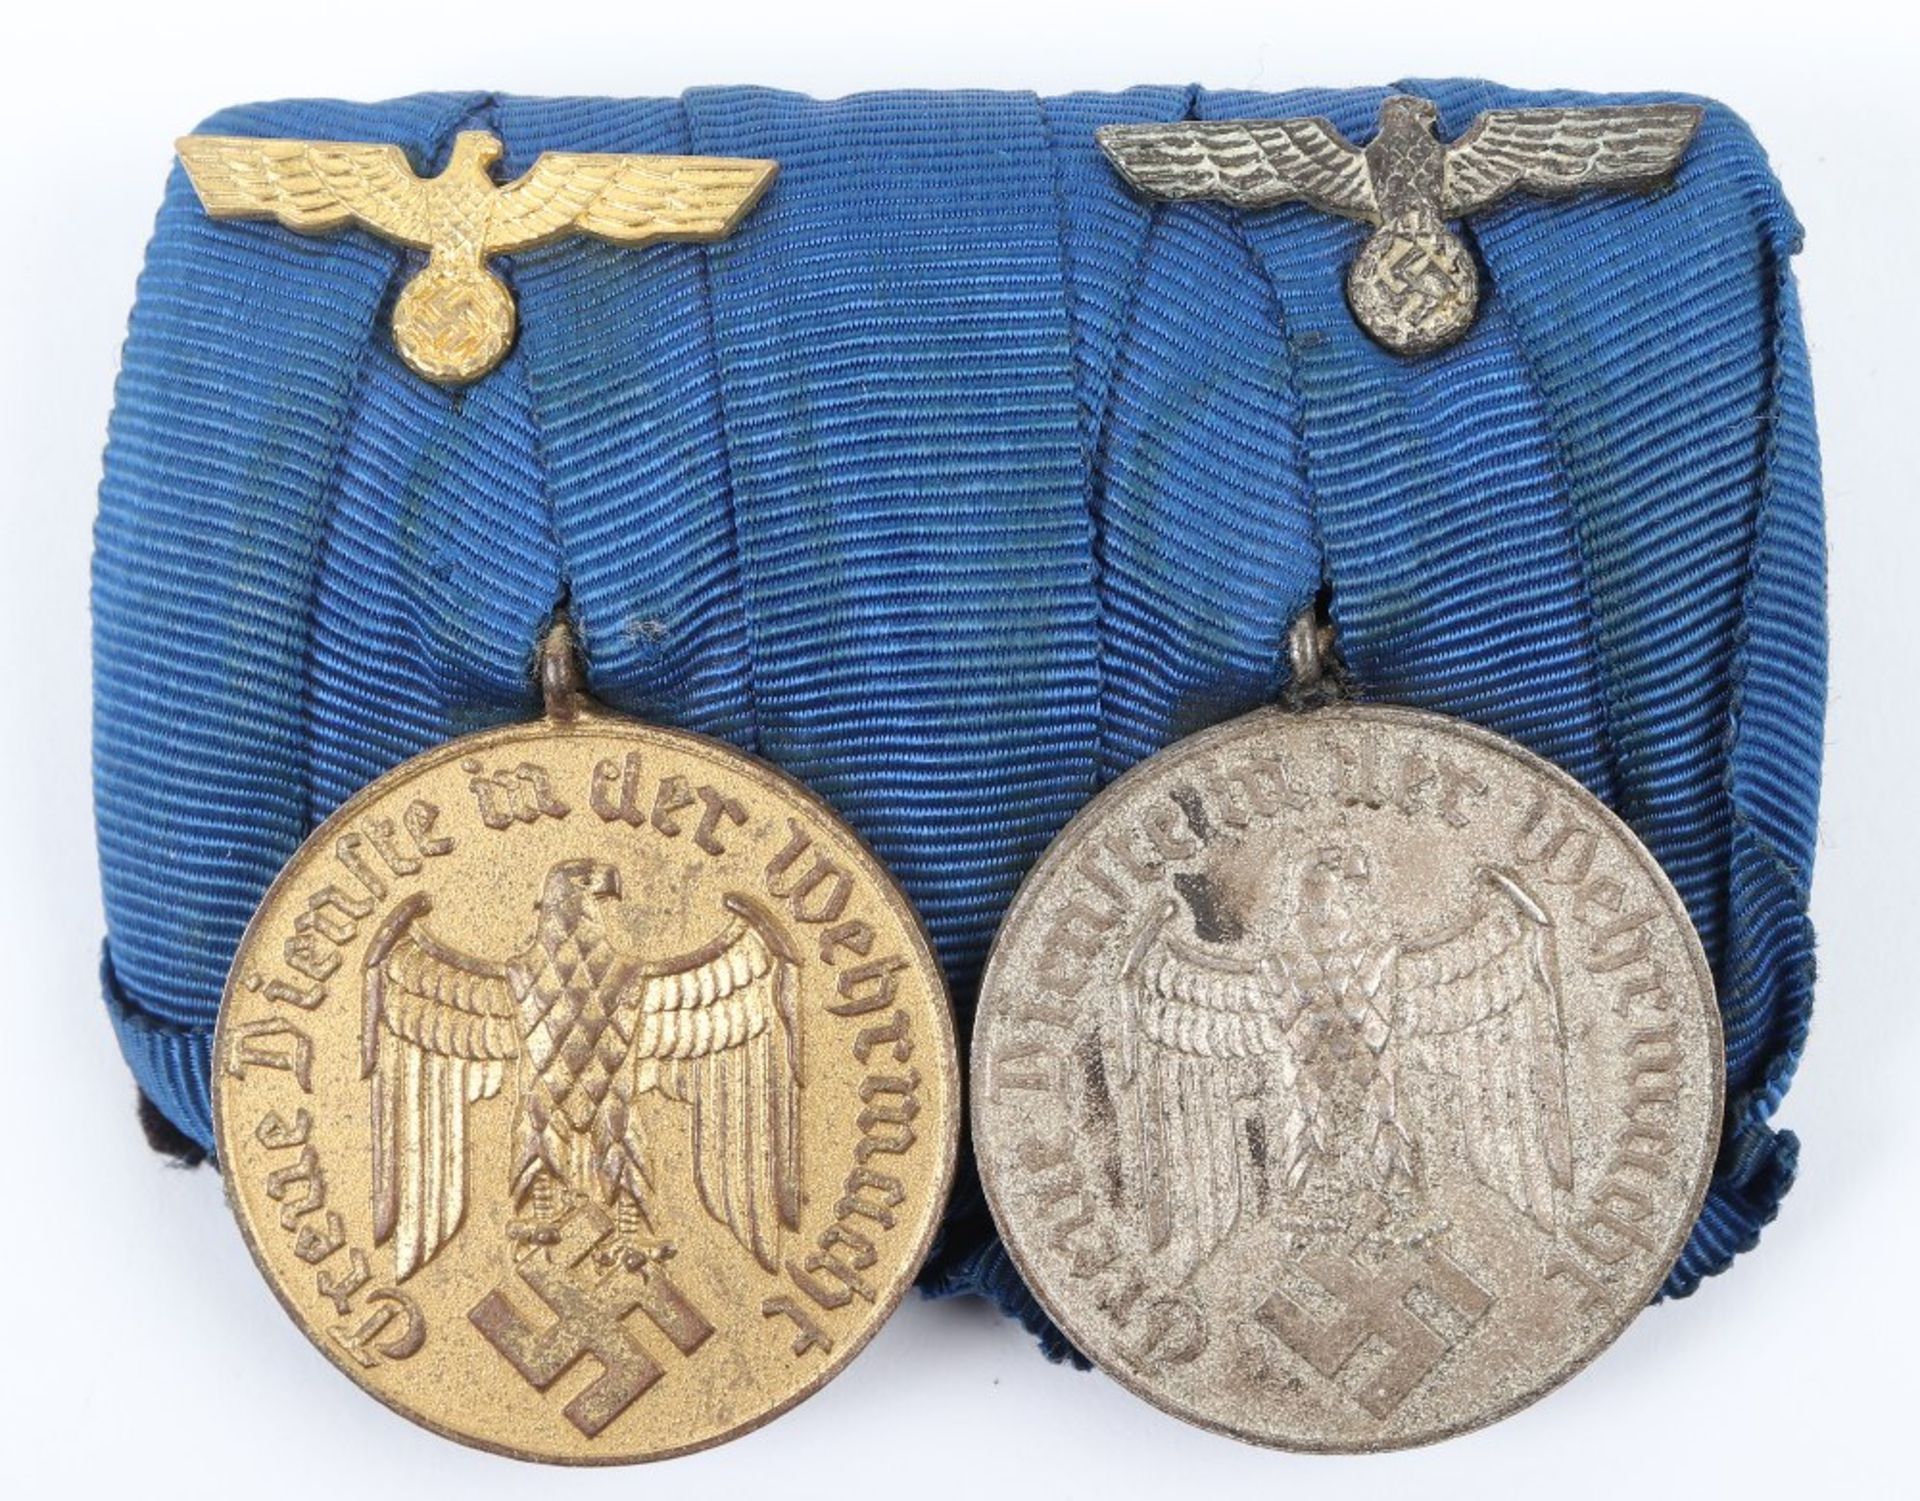 WW2 German Armed Forces Long Service Court Mounted Medal Pair